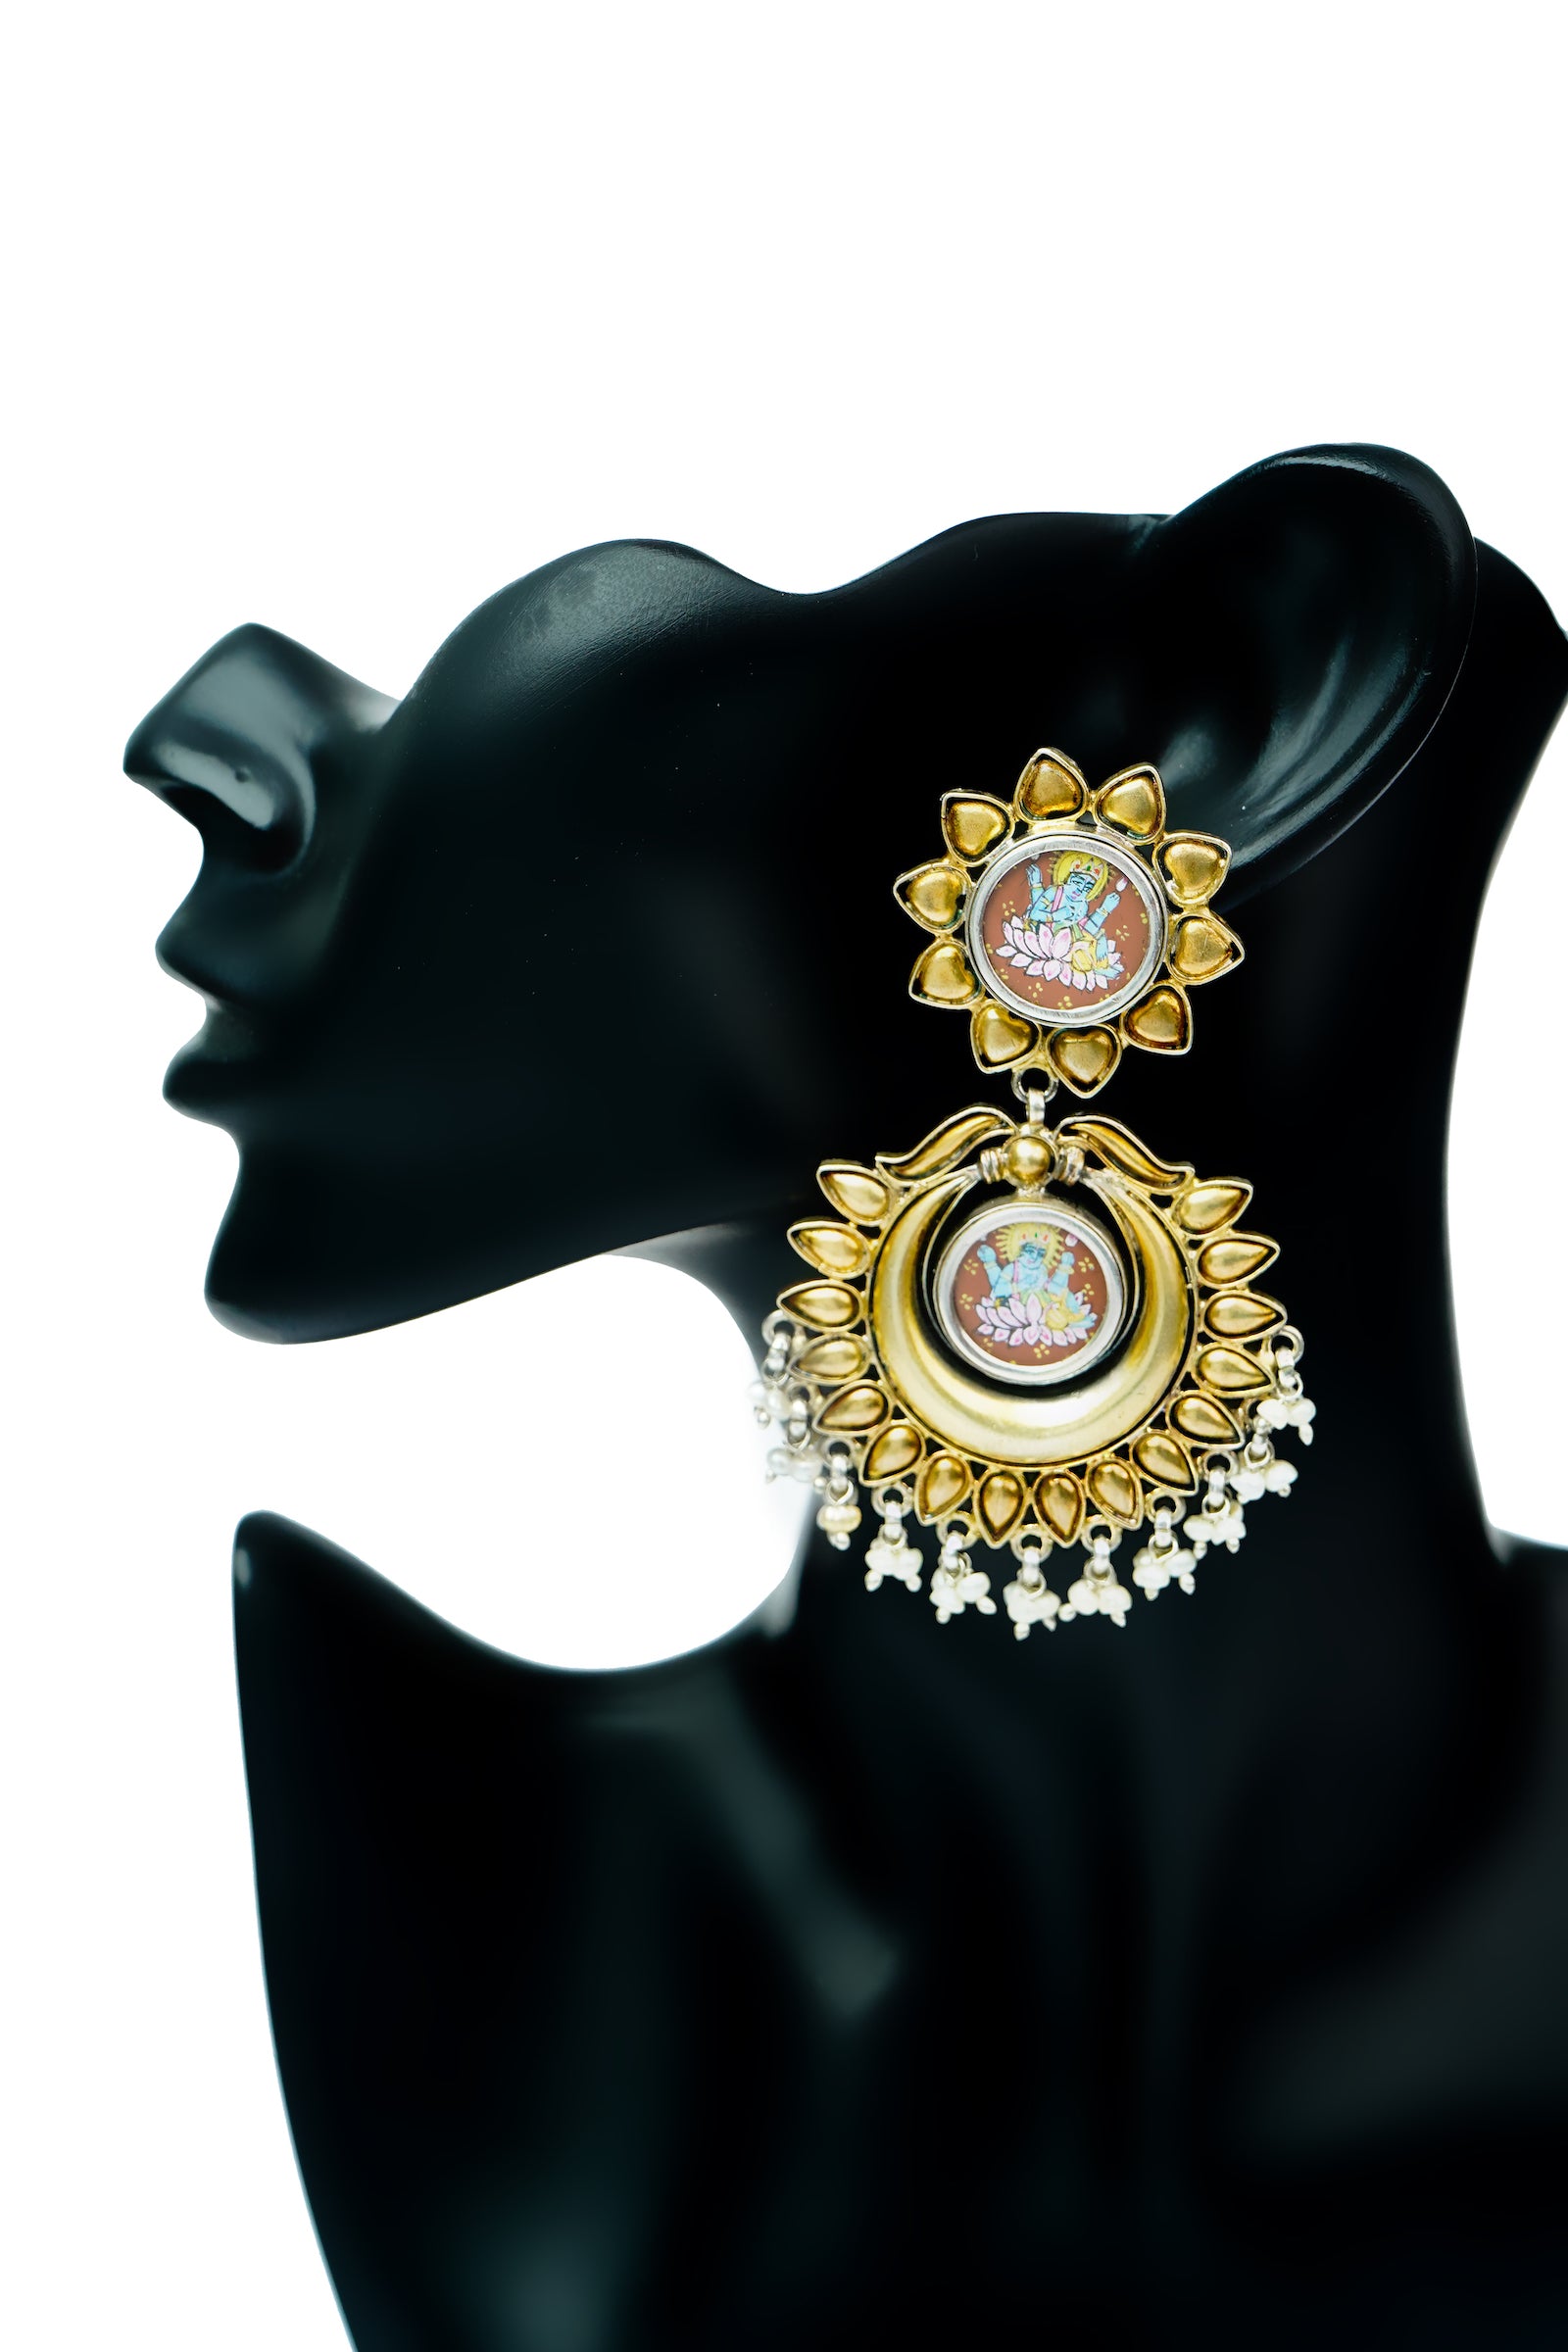 Silver Gold Plated Earrings with Hand Painting - Neeta Boochra Jewellery